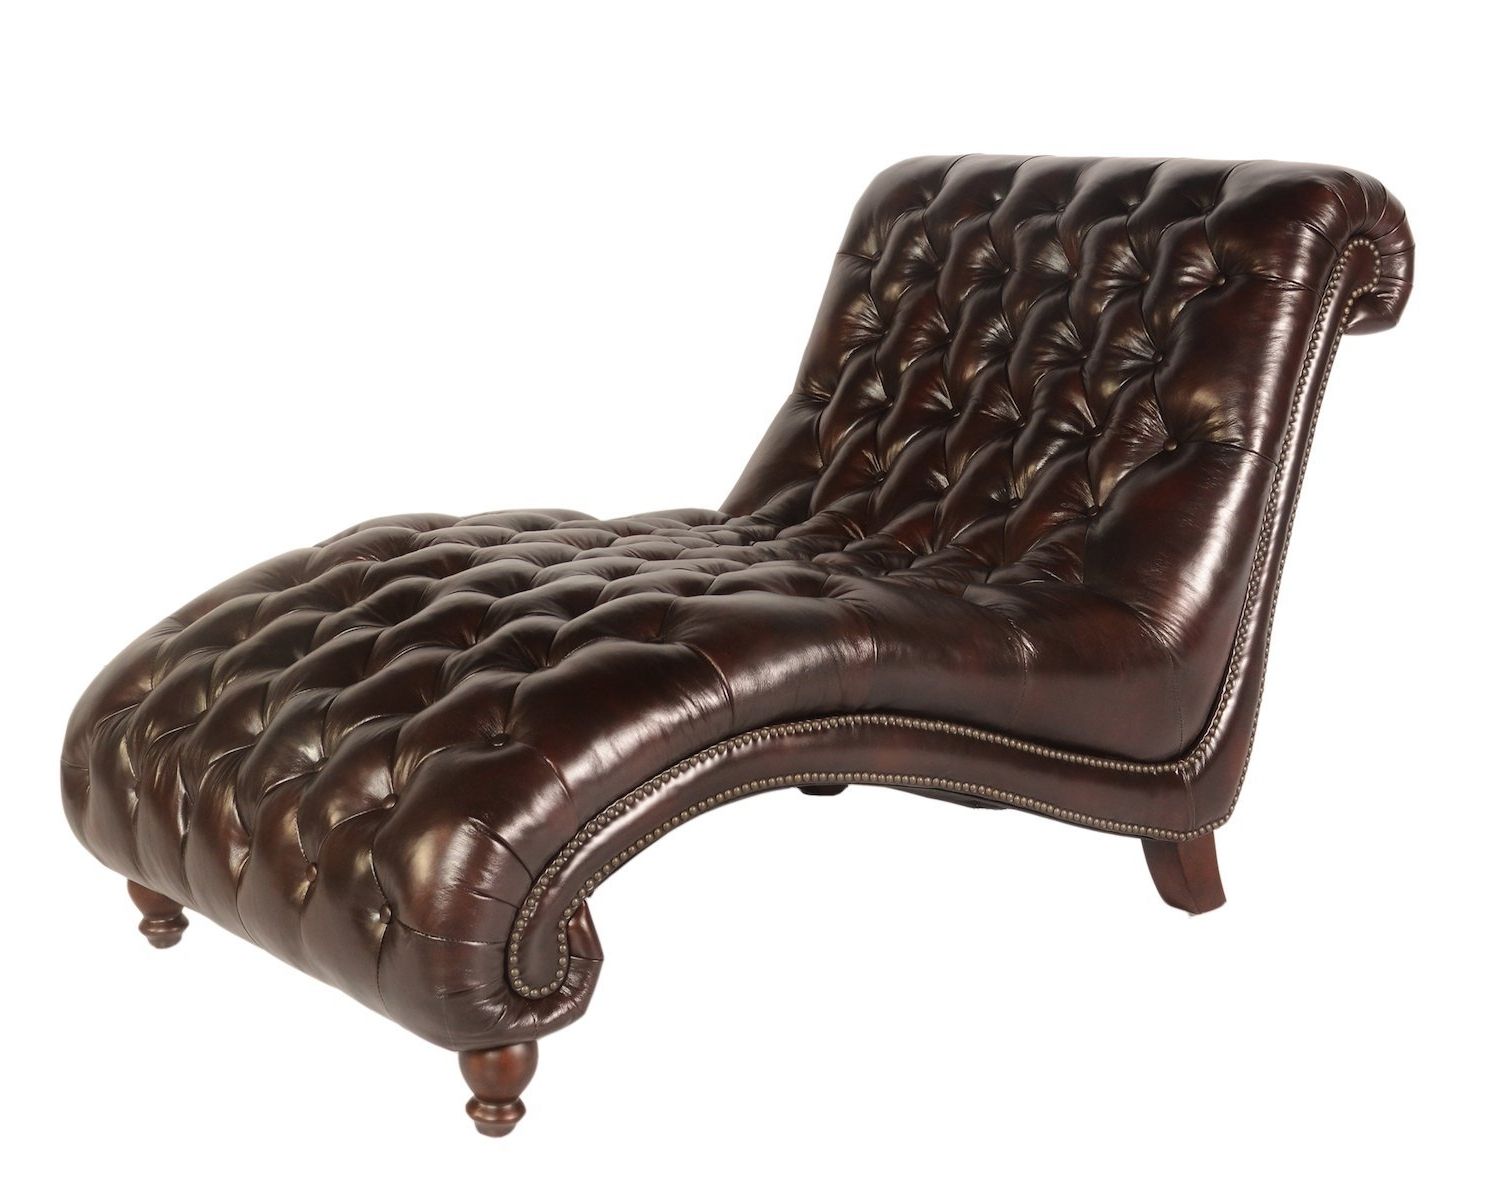 Best And Newest Leather Chaise Lounges Throughout Amazon: Lazzaro C3988 Double Chaise In Vintage Toberlone (View 5 of 15)